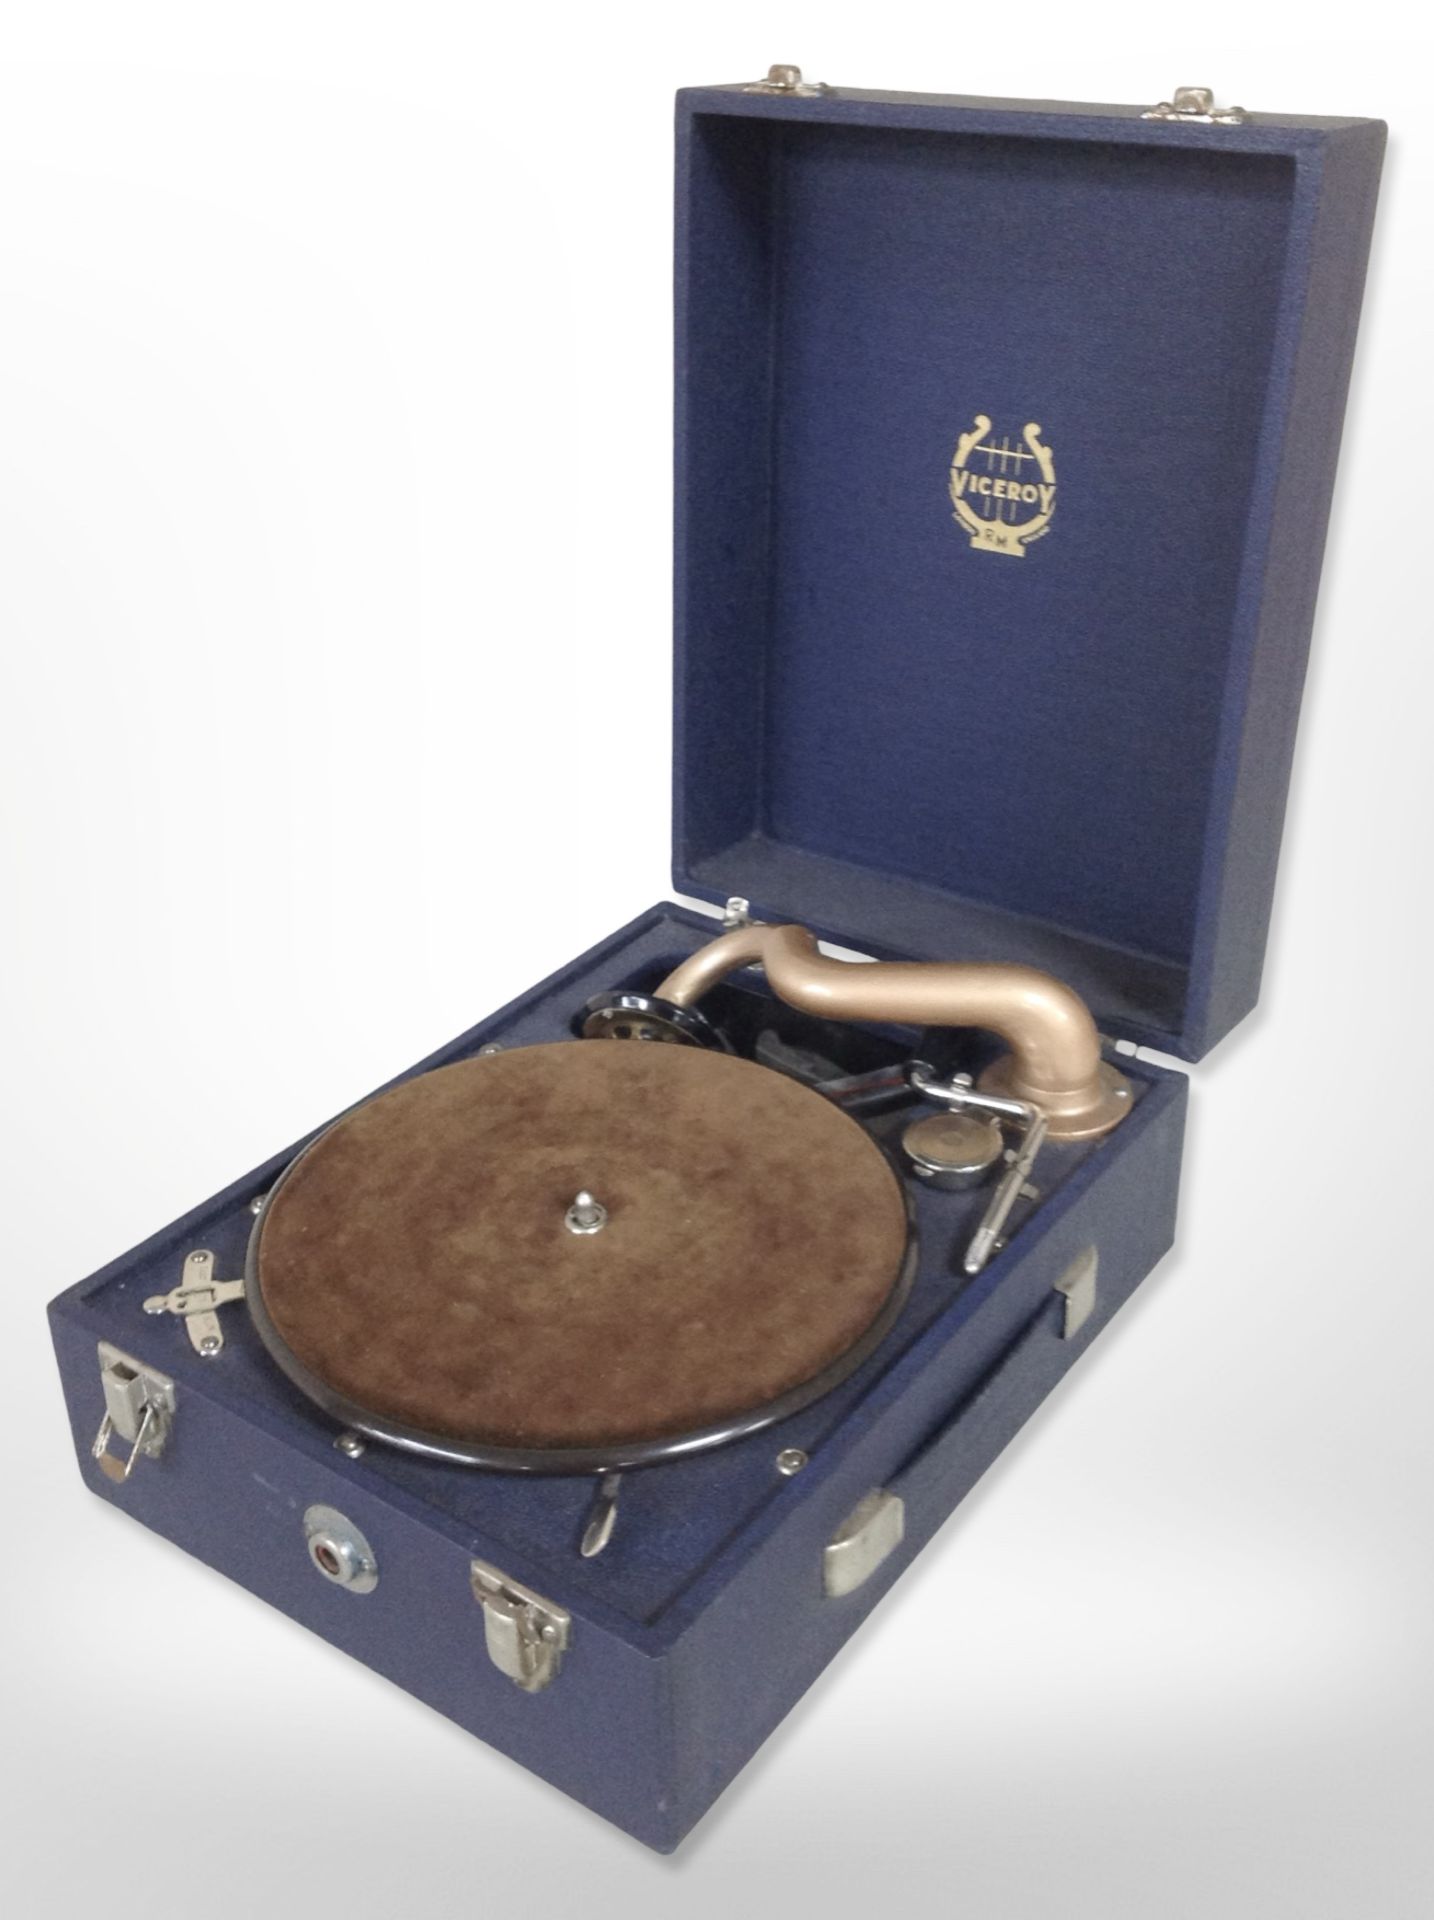 A Viceroy portable record player.